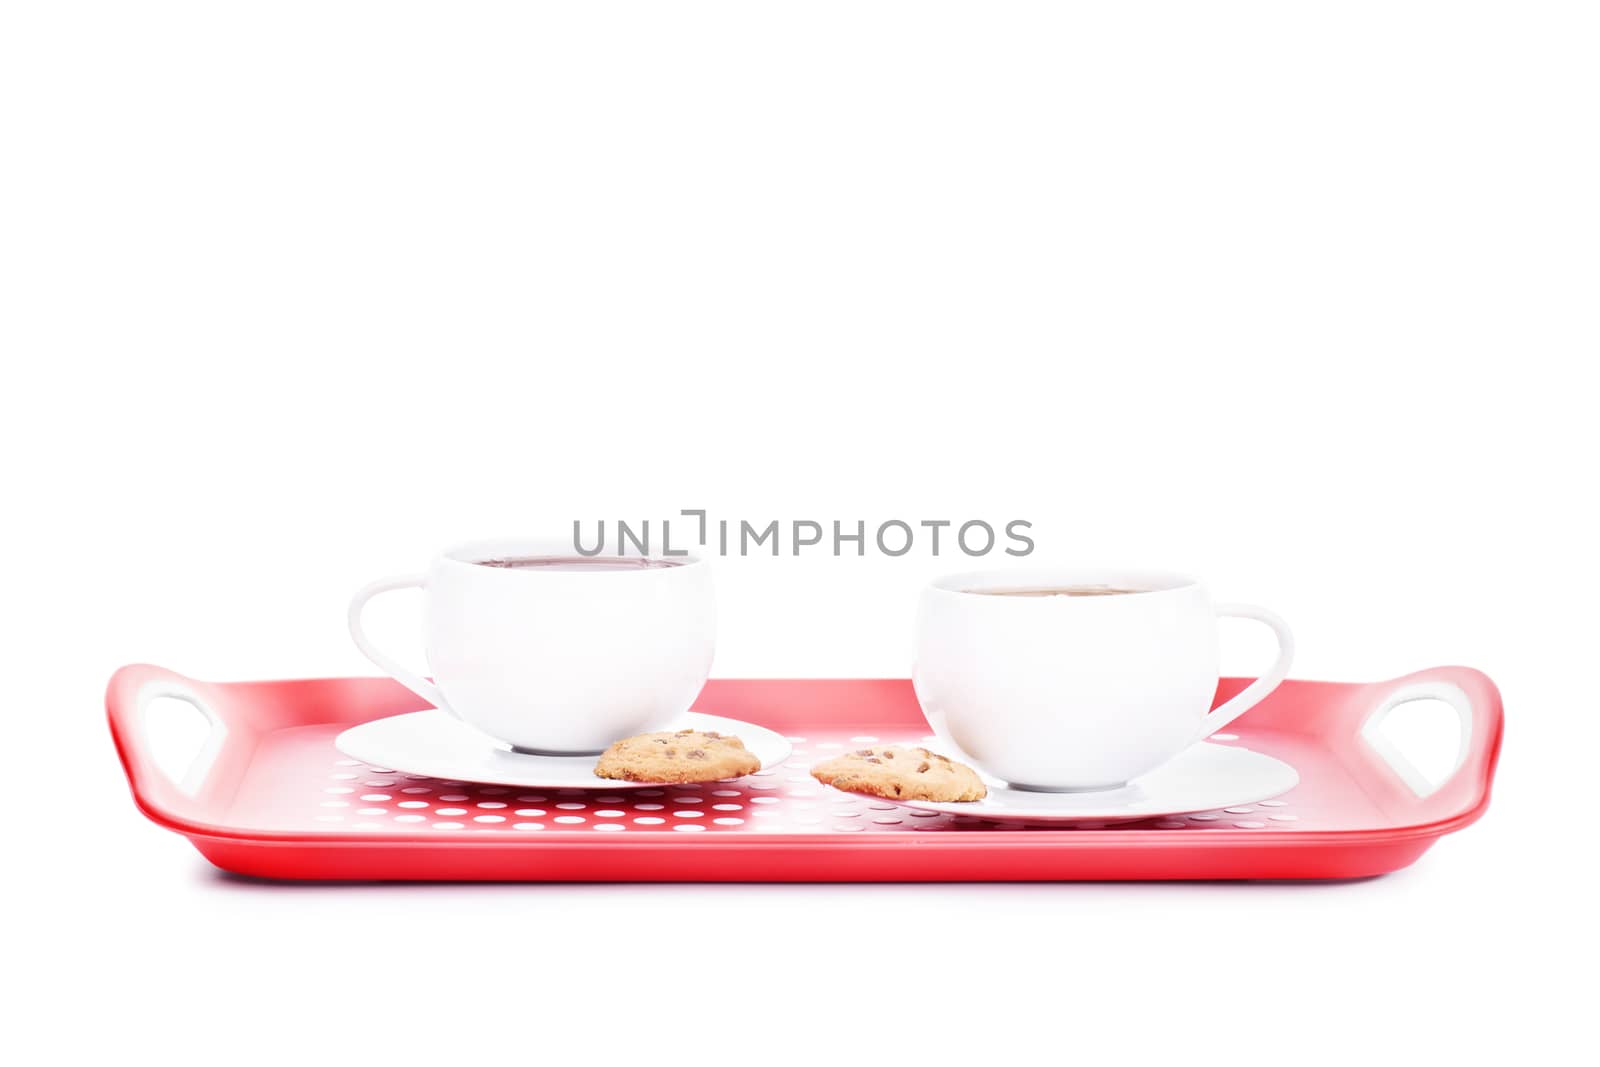 Two cups of tea with cookies on a platter by Mendelex